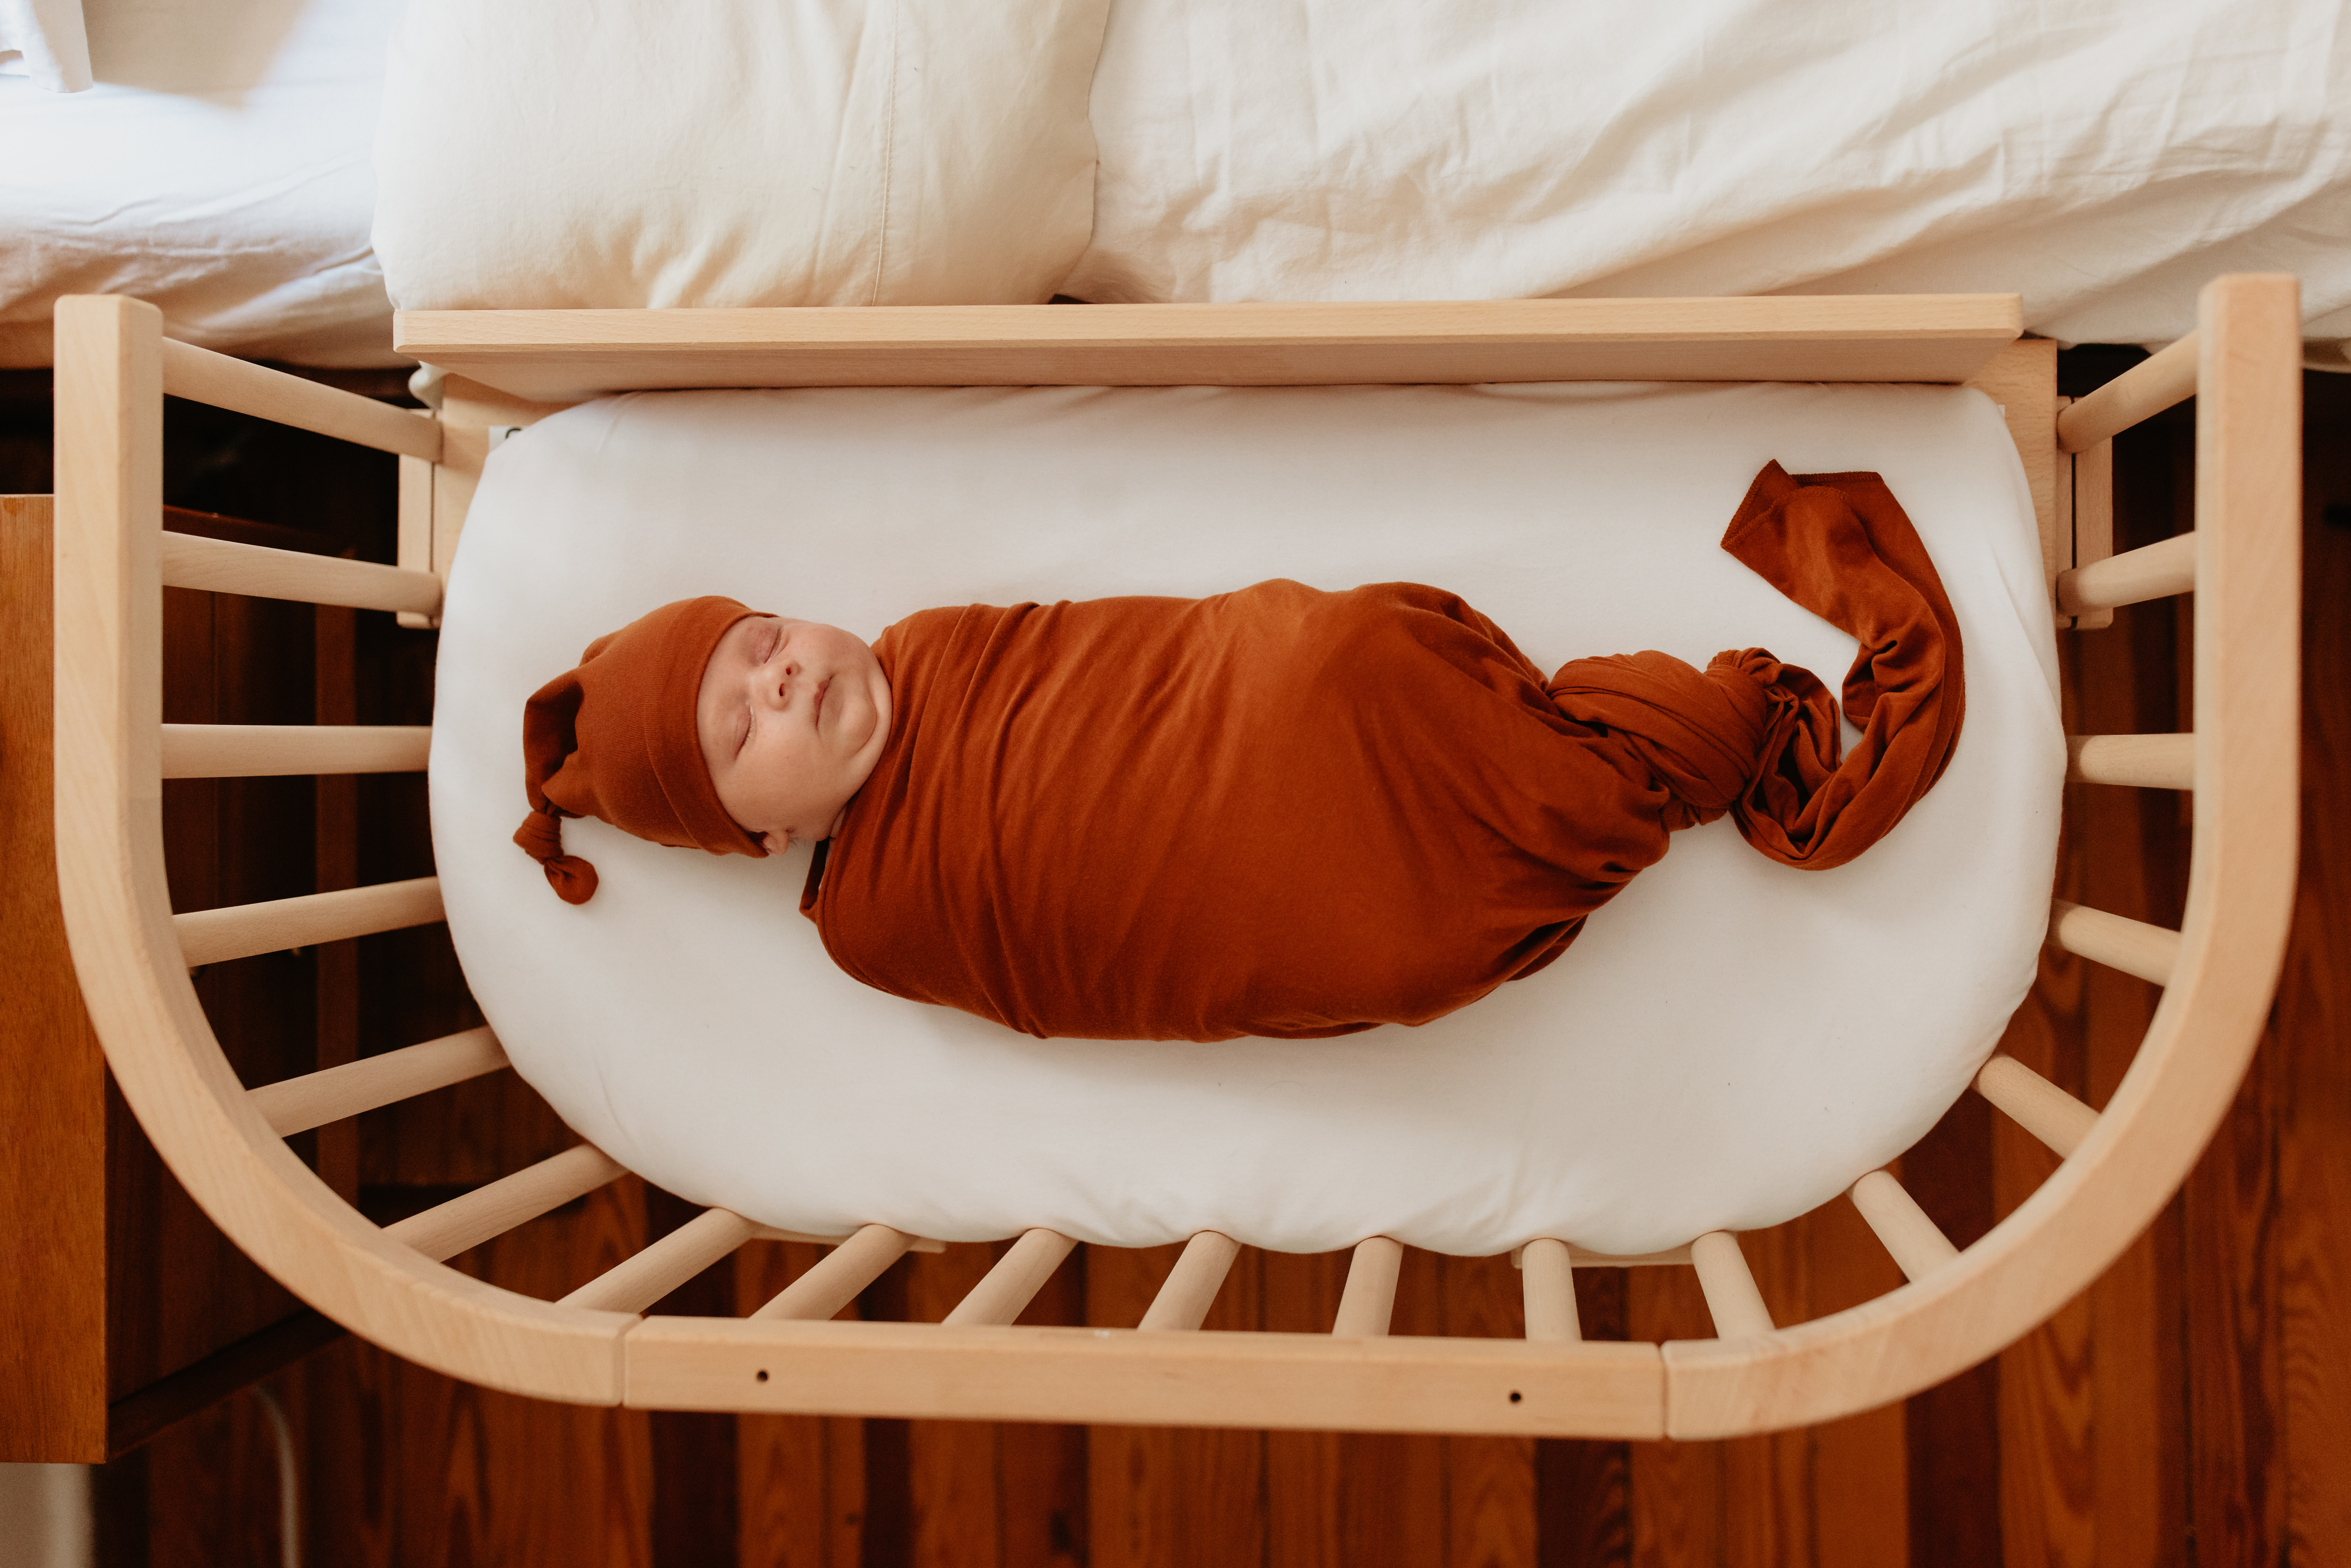 Will Co Sleeping with a Newborn Make Them Less Independent?